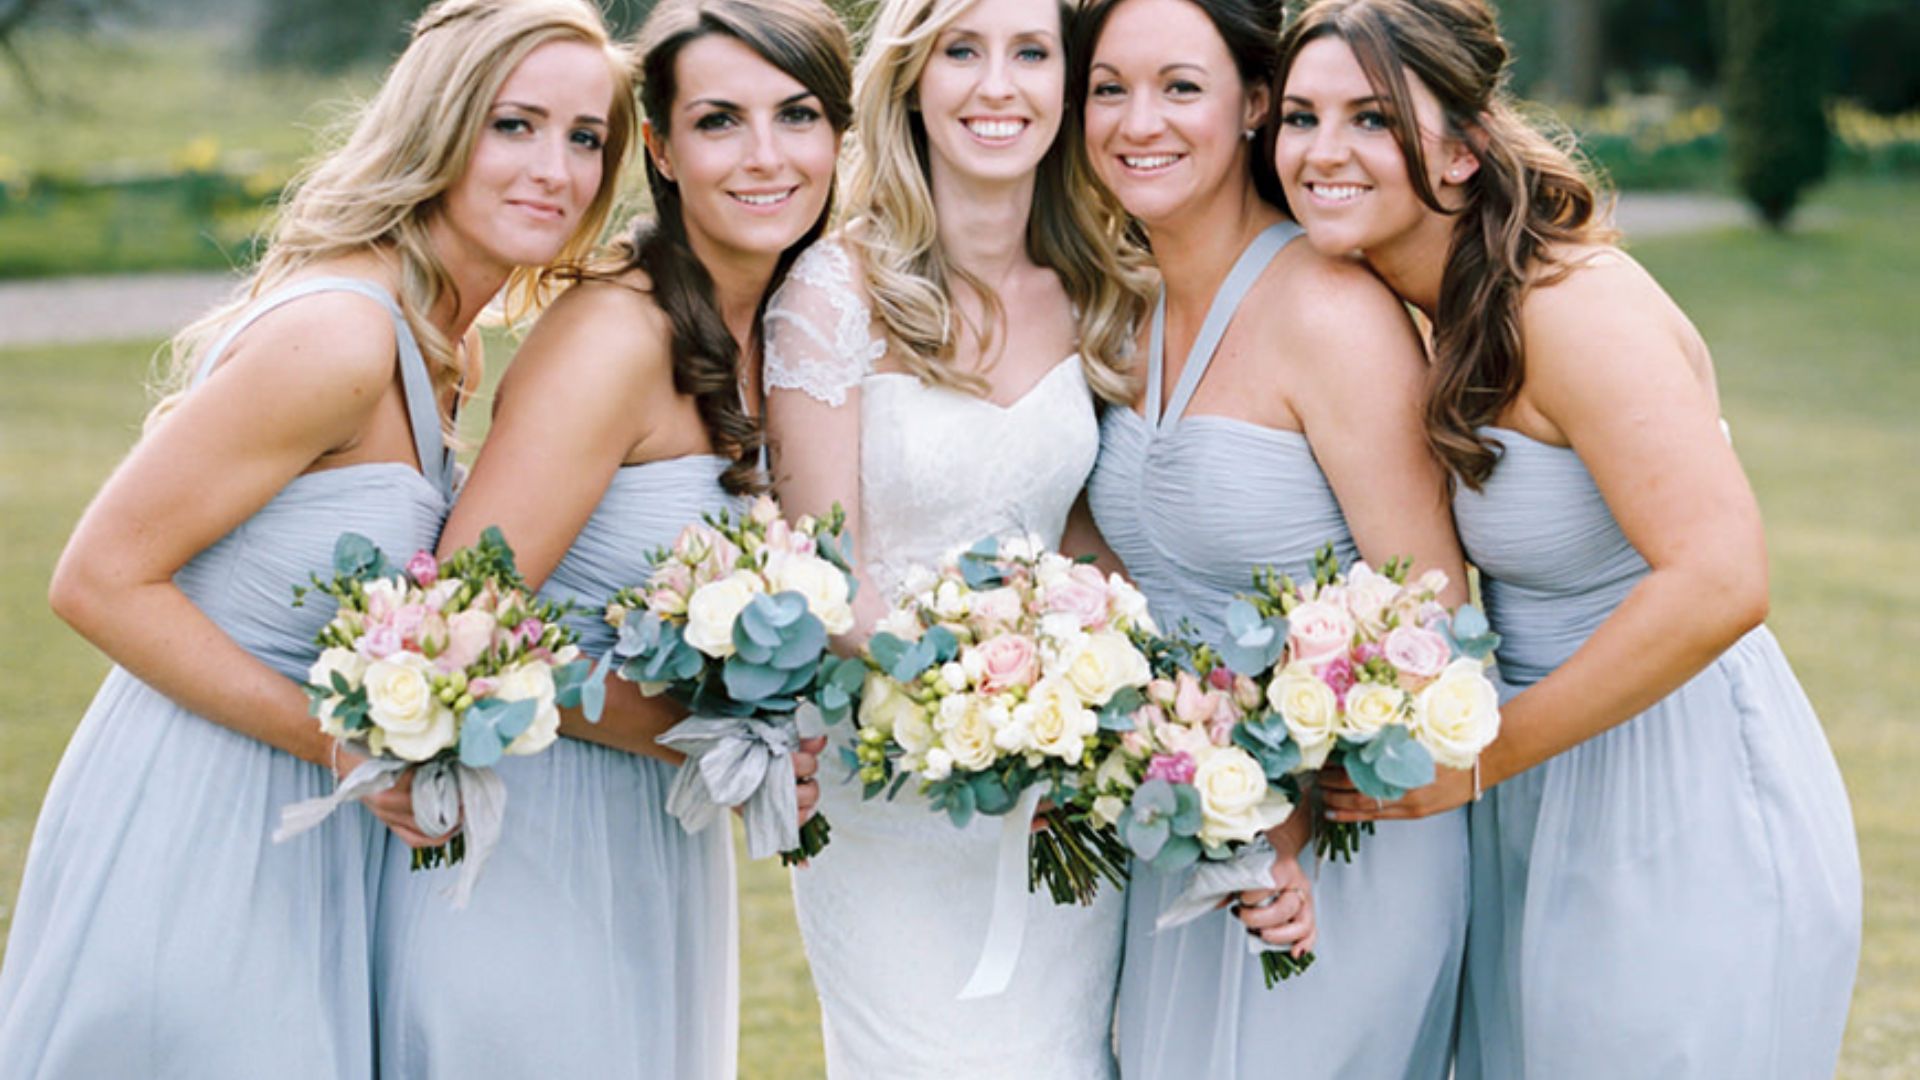 Ways to Allow Your Bridesmaids to Express Their Unique Style